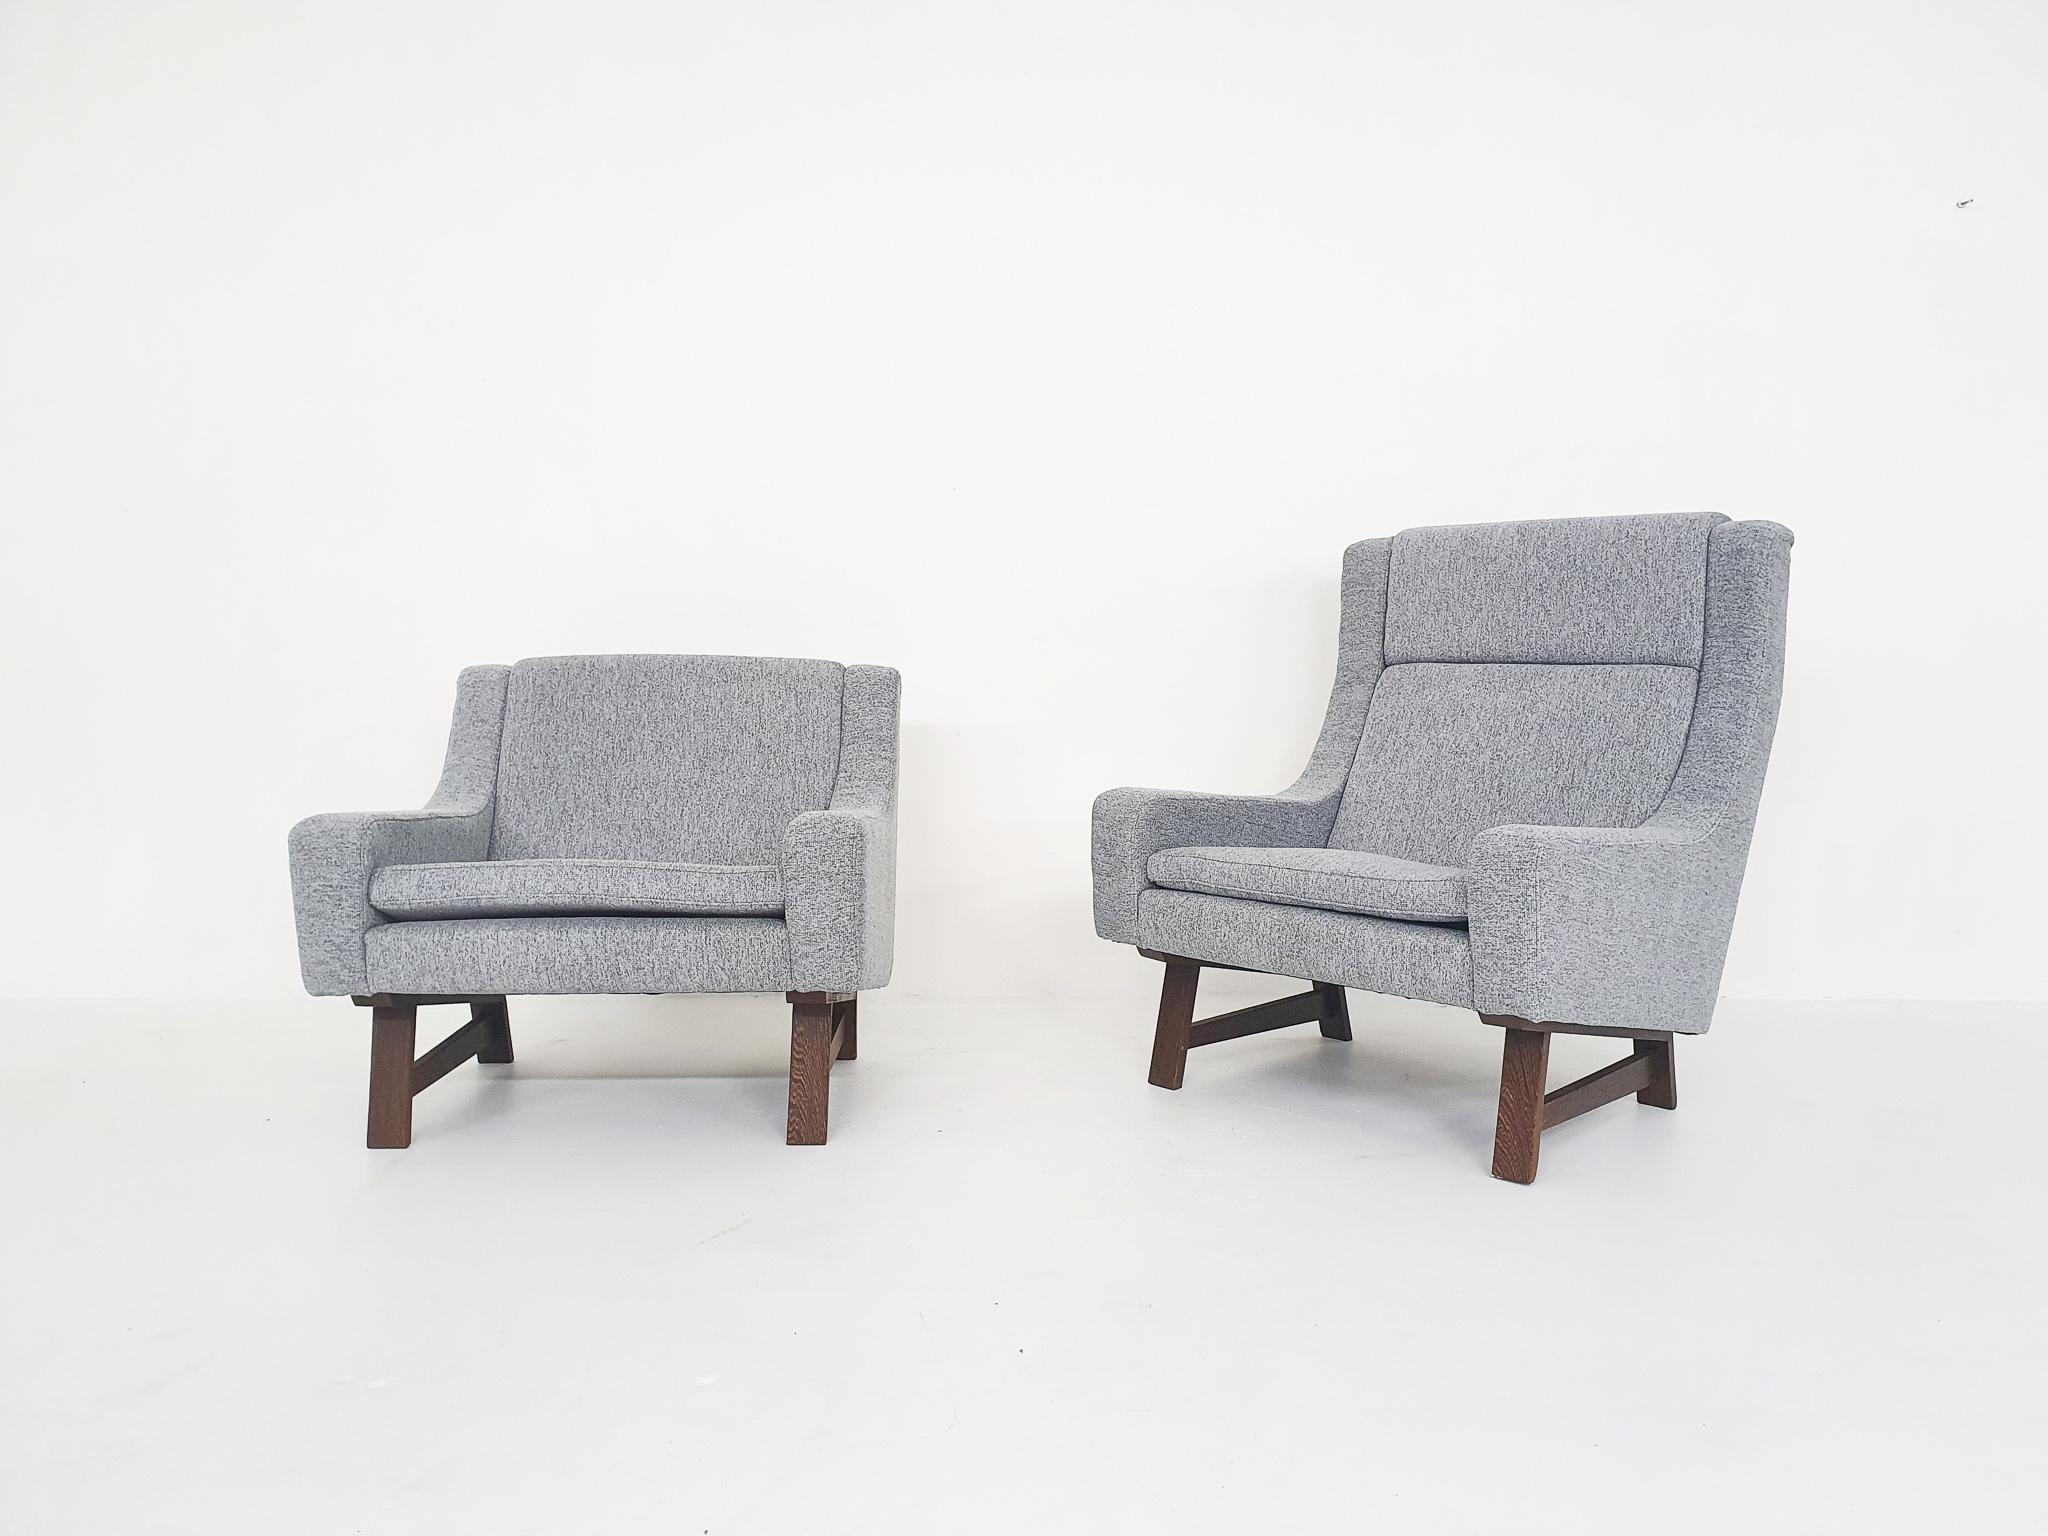 A beautiful set of lounge chairs probably made in Scandanavia or the Netherlands. The set consists of ahigh 